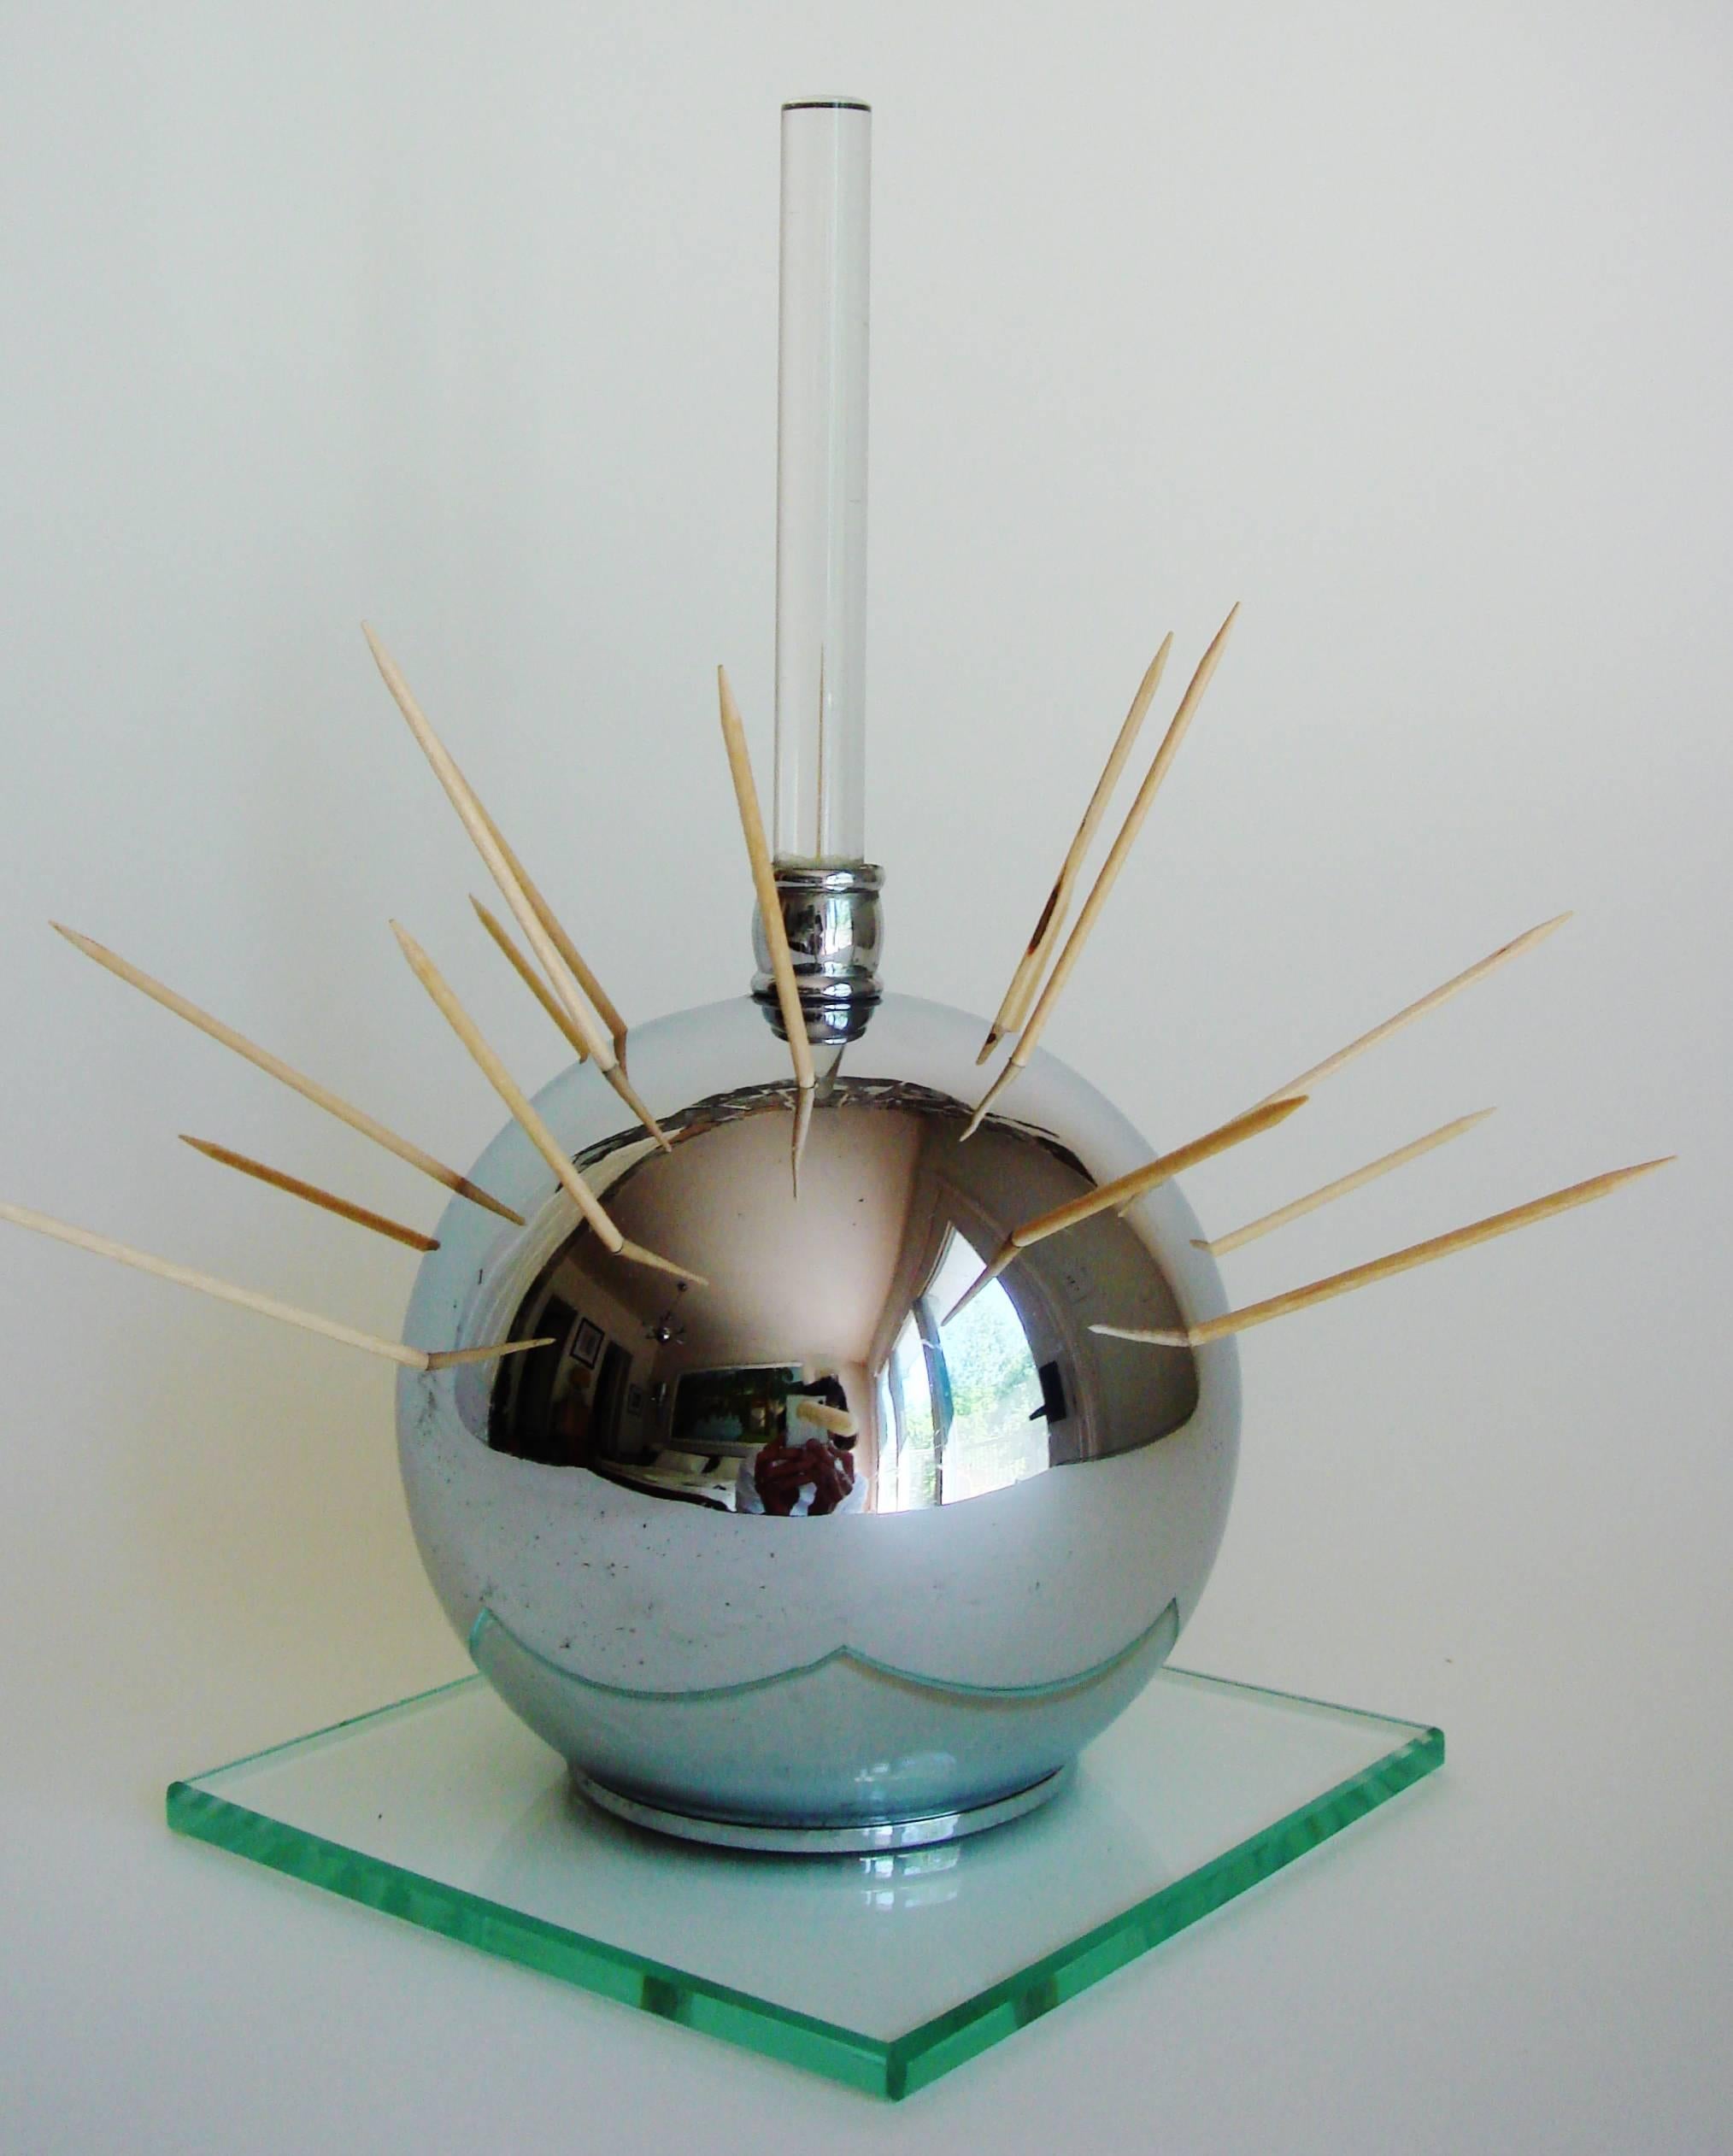 This large American Art Deco cocktail ball was designed to enable the perfect Hostess/host to elegantly offer hors d'oeuvres to guests. It features a crystal rod handle that rises from a pierced chrome sphere which in turns sits on a beveled edge